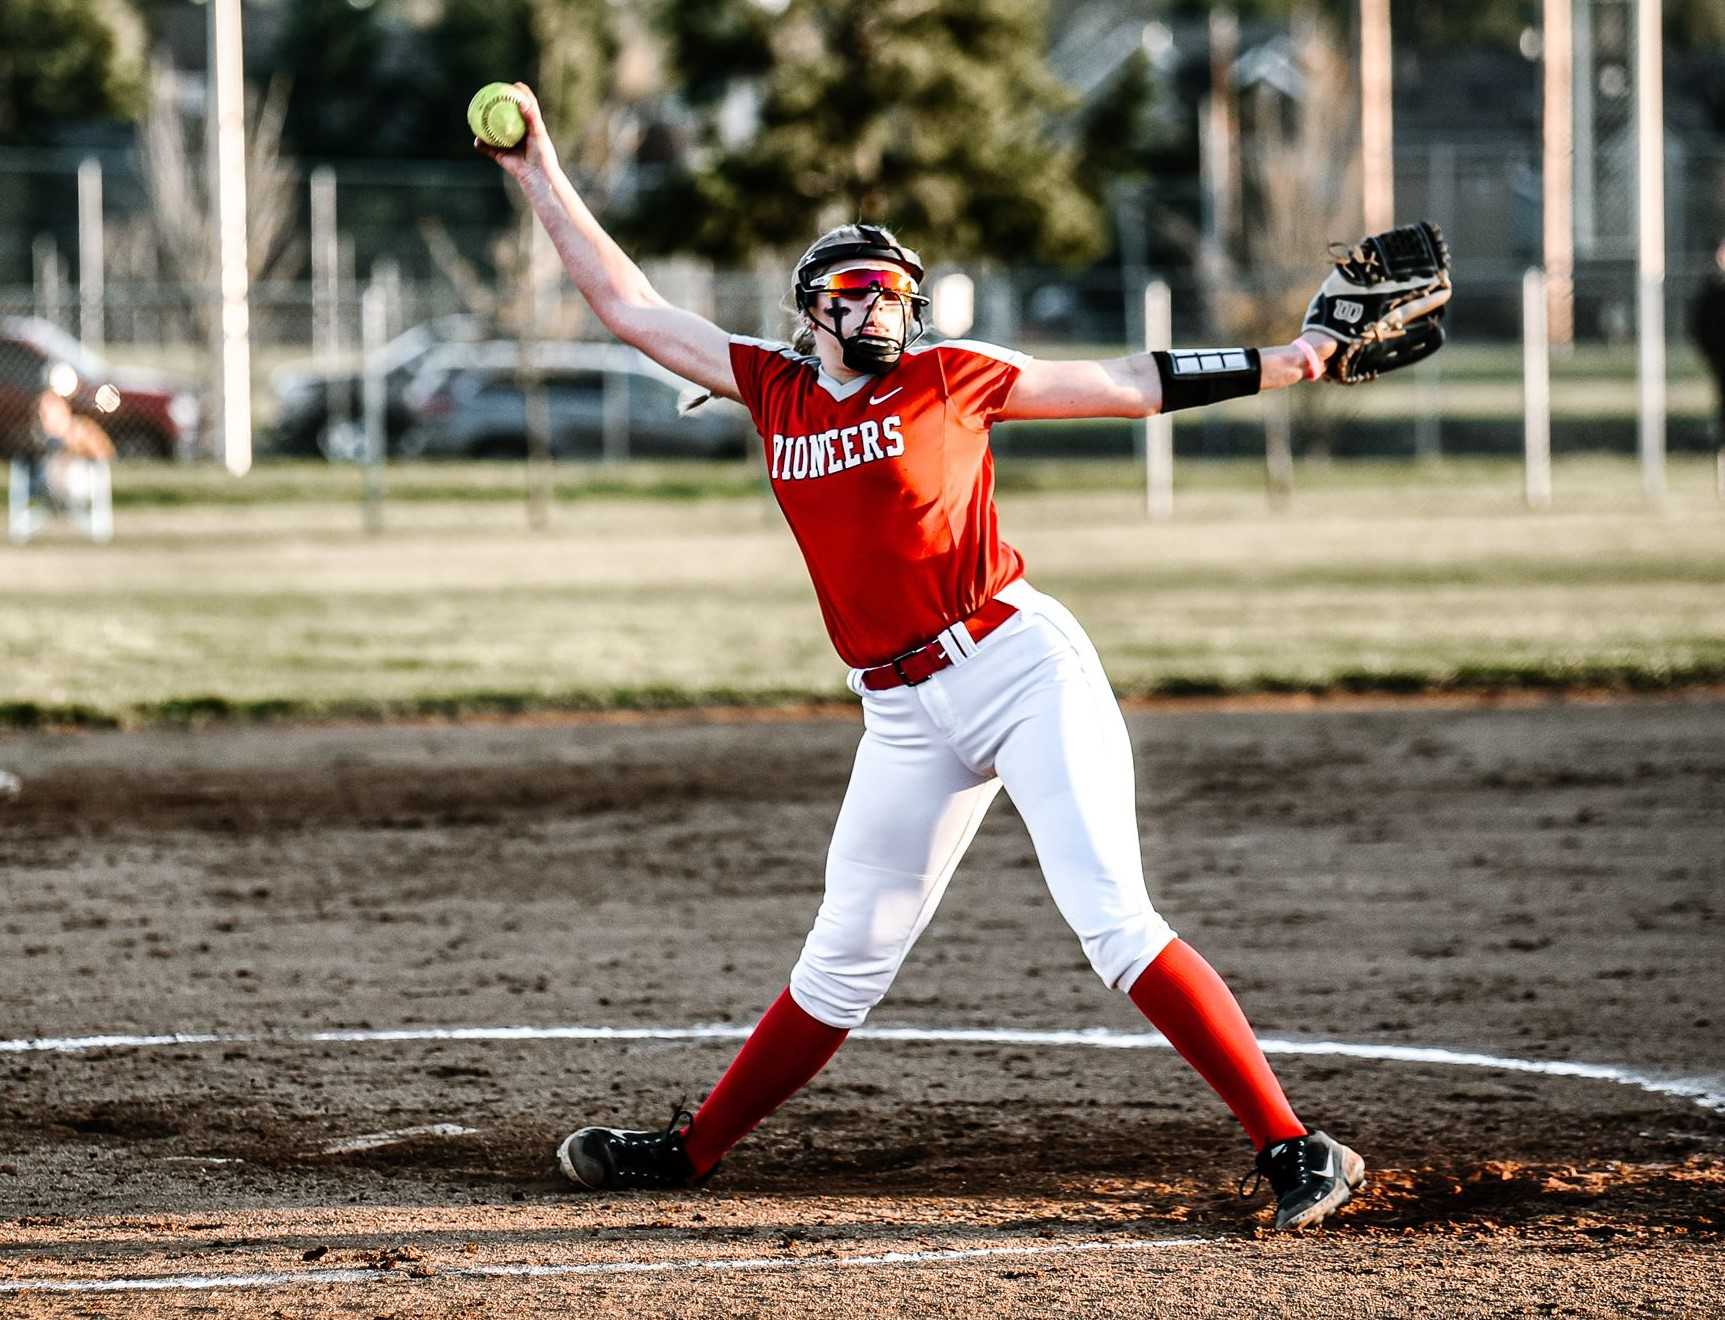 Oregon City's Lily Riley struck out 220 in 135 1/3 innings last season, posting a 0.93 ERA. (Photo by Fanta Mithmeuangneua)